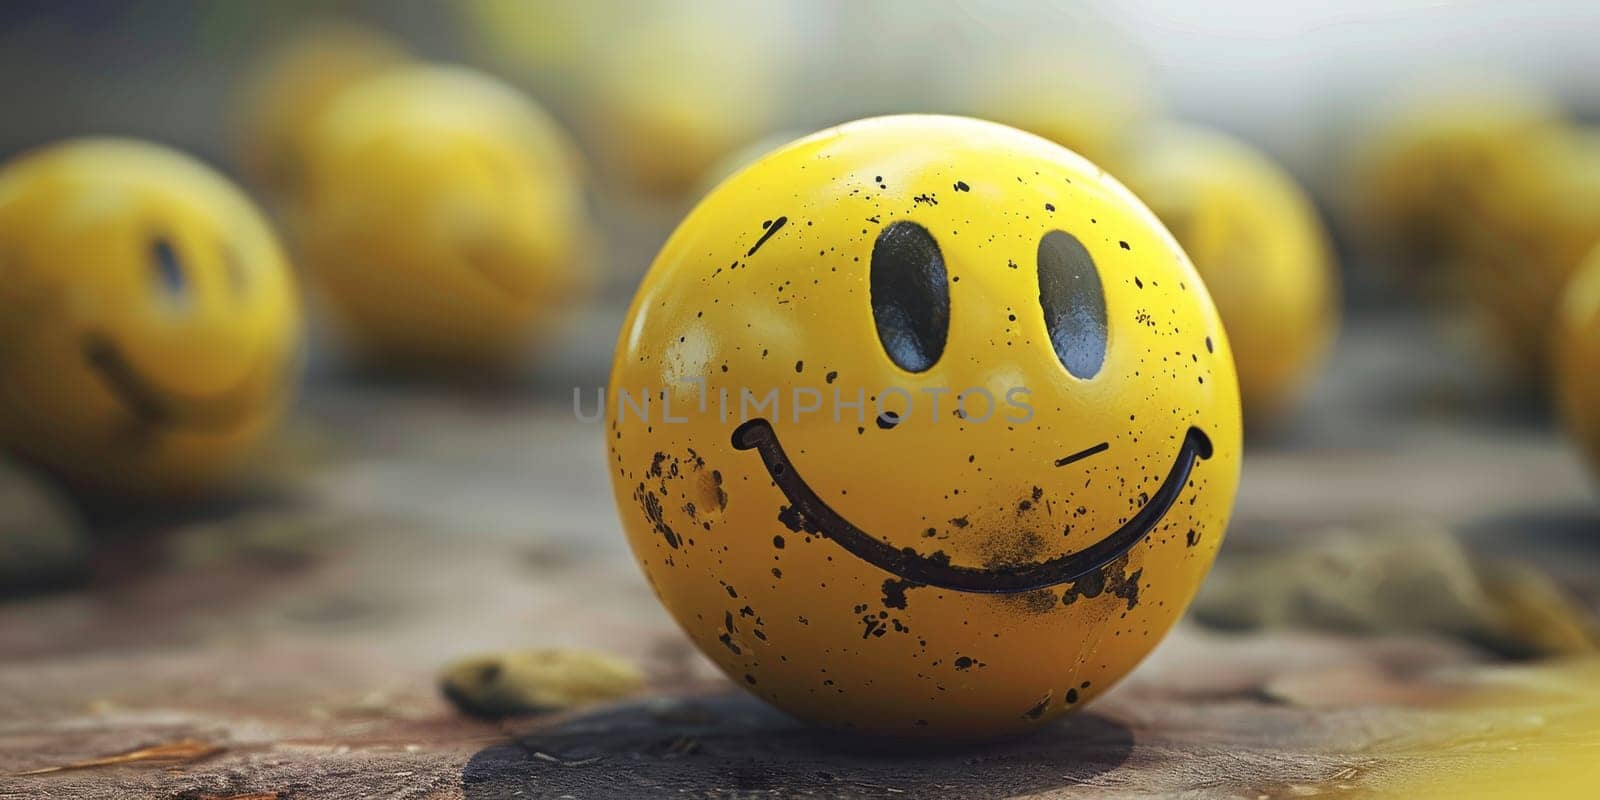 Yellow ball with smiley face painted on it